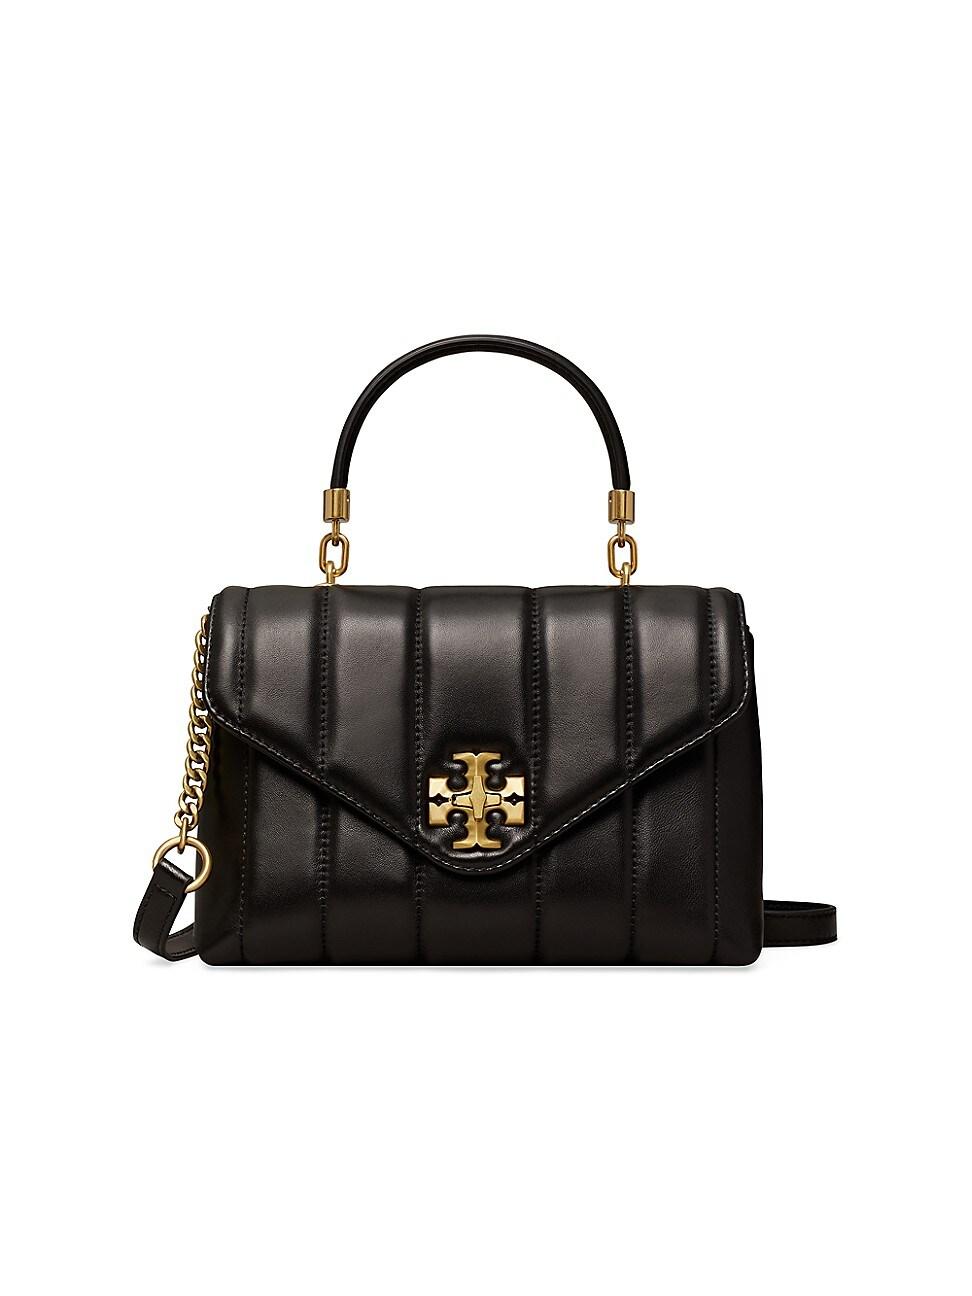 Tory Burch Black Quilted Small Leather Kira Top Handle Bag Tory Burch